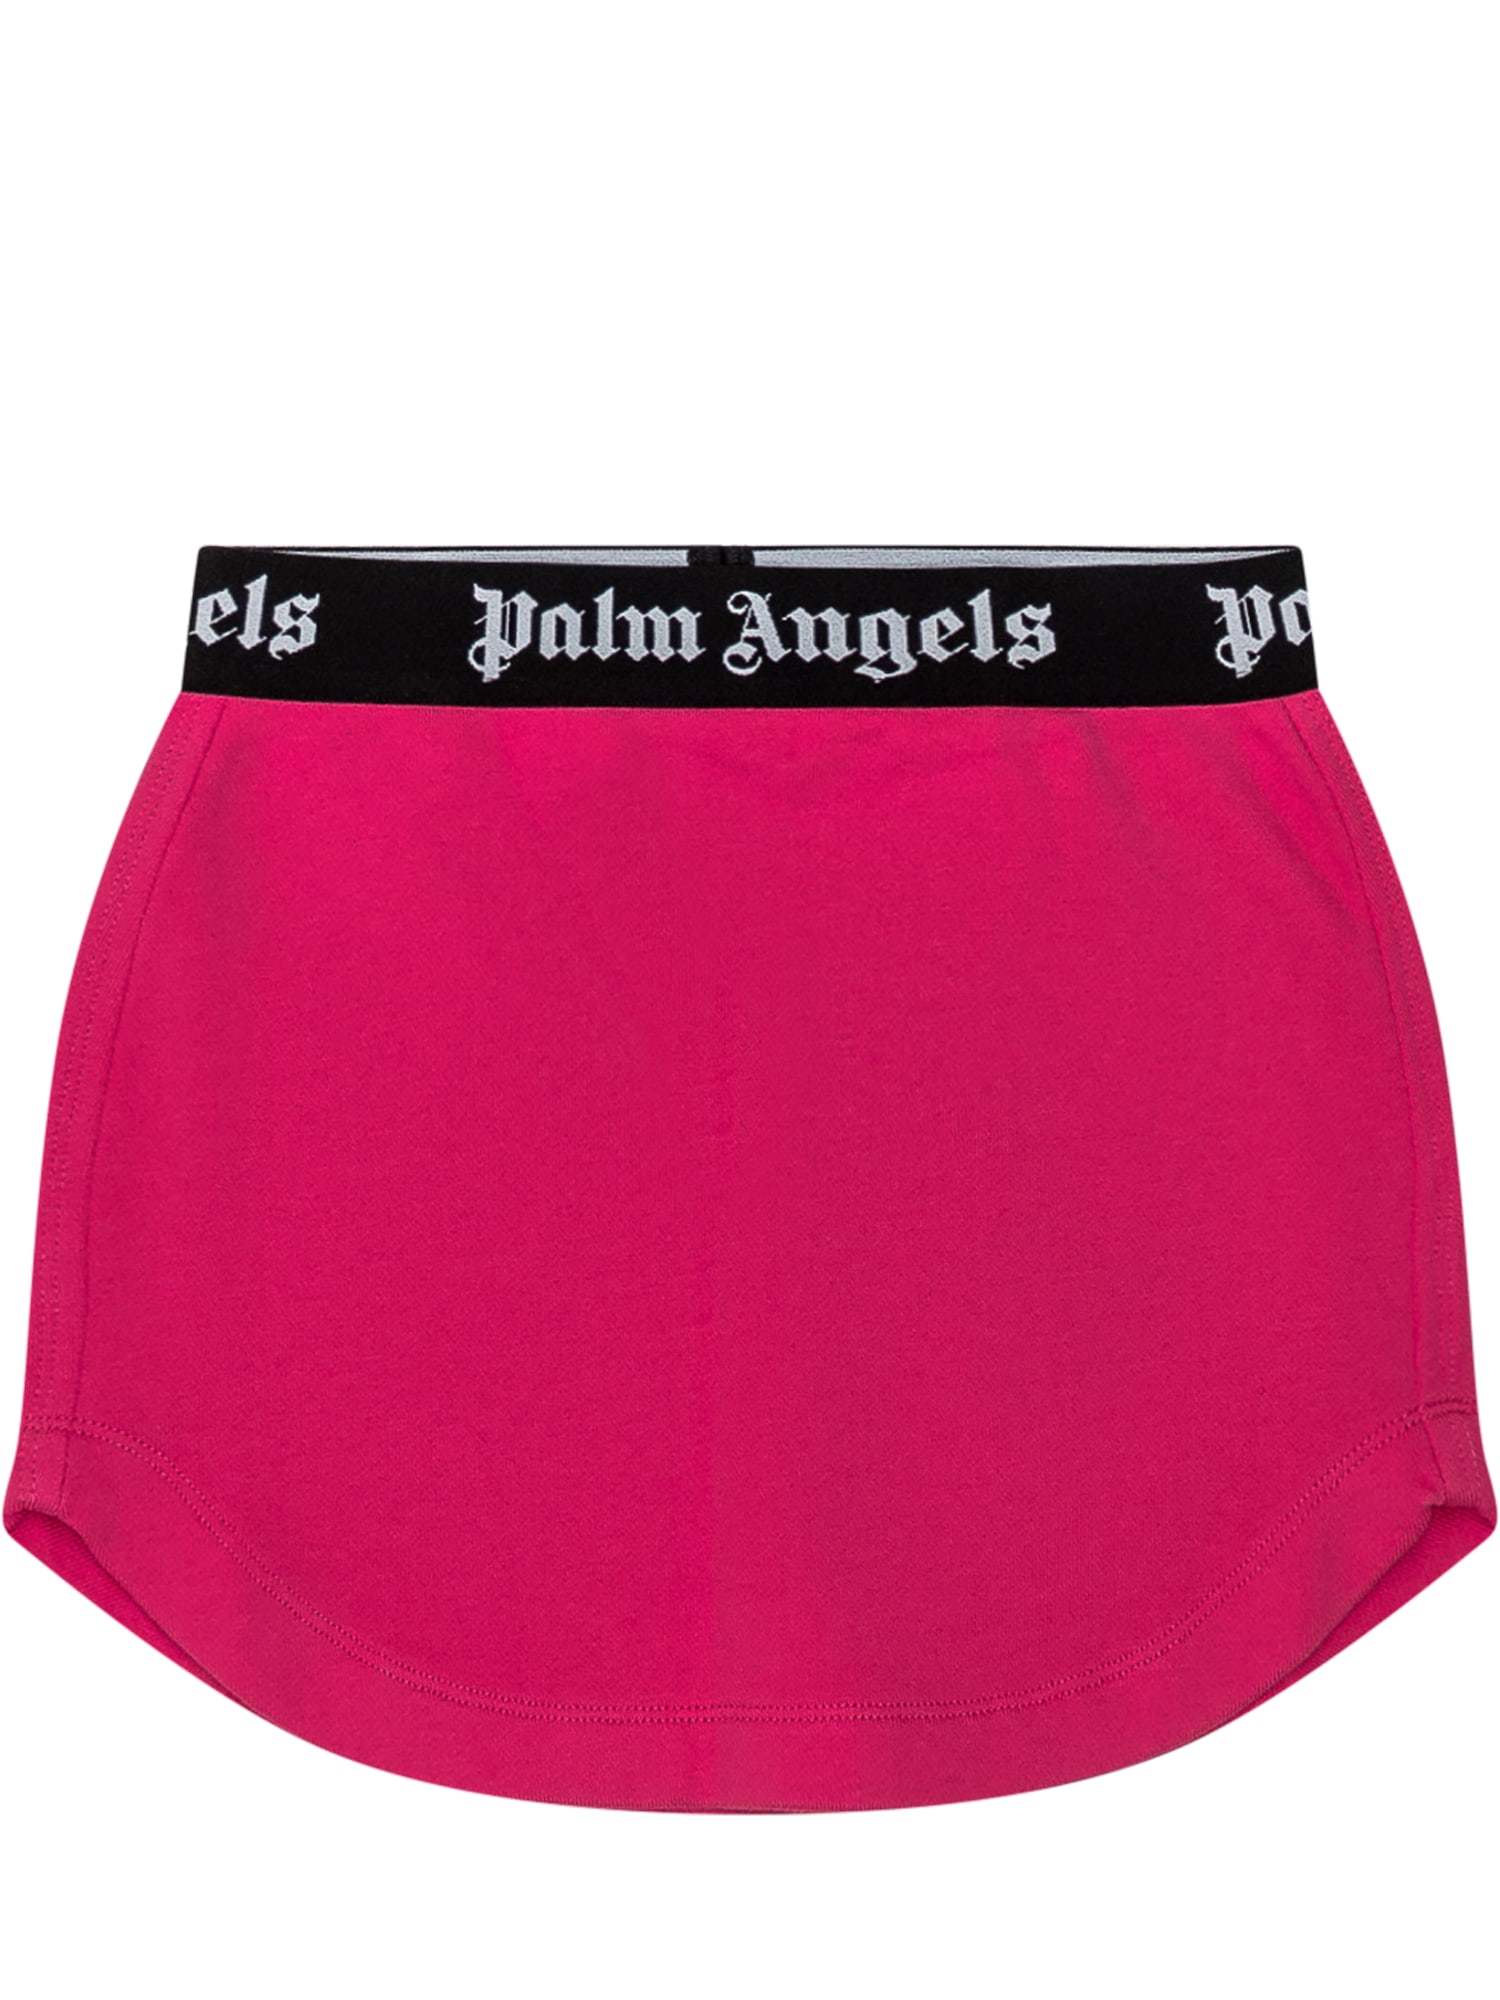 Palm Angels Skirt With Logo